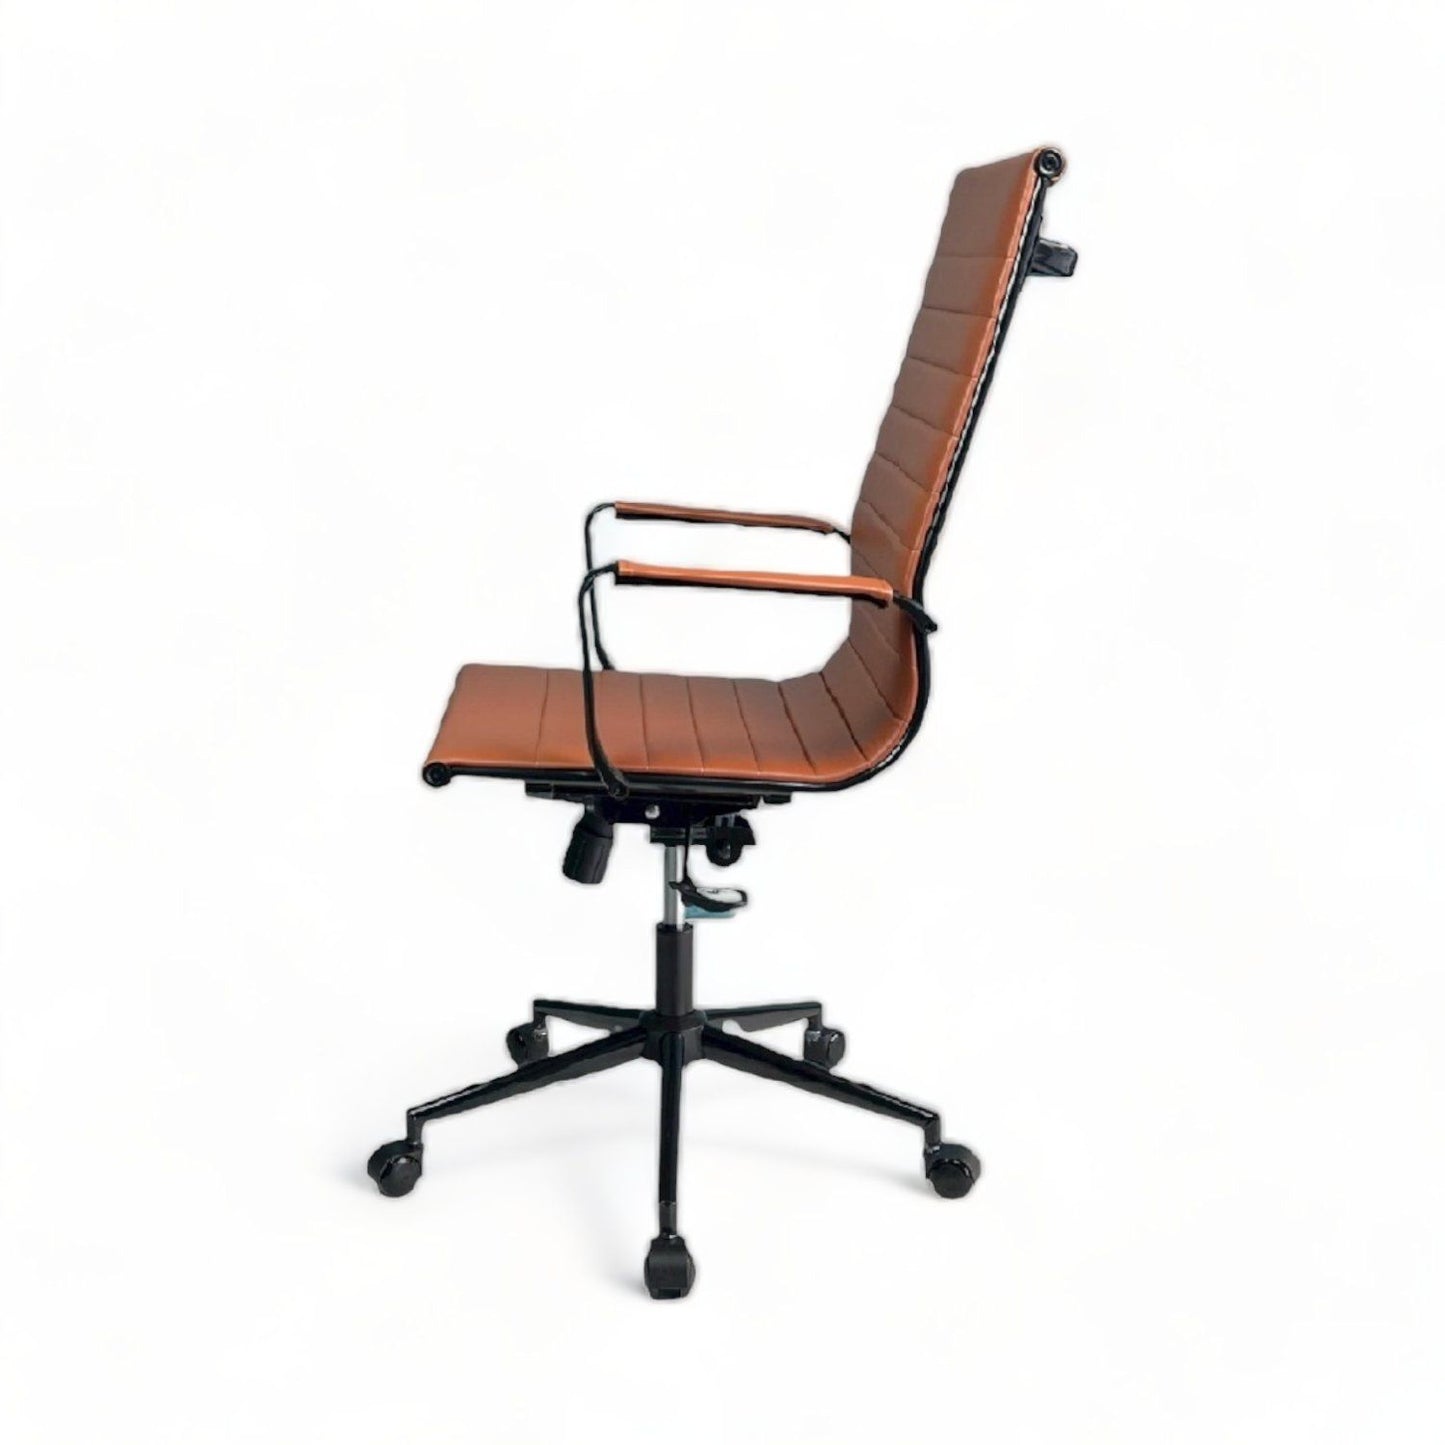 Bety Manager - Tan - Office Chair